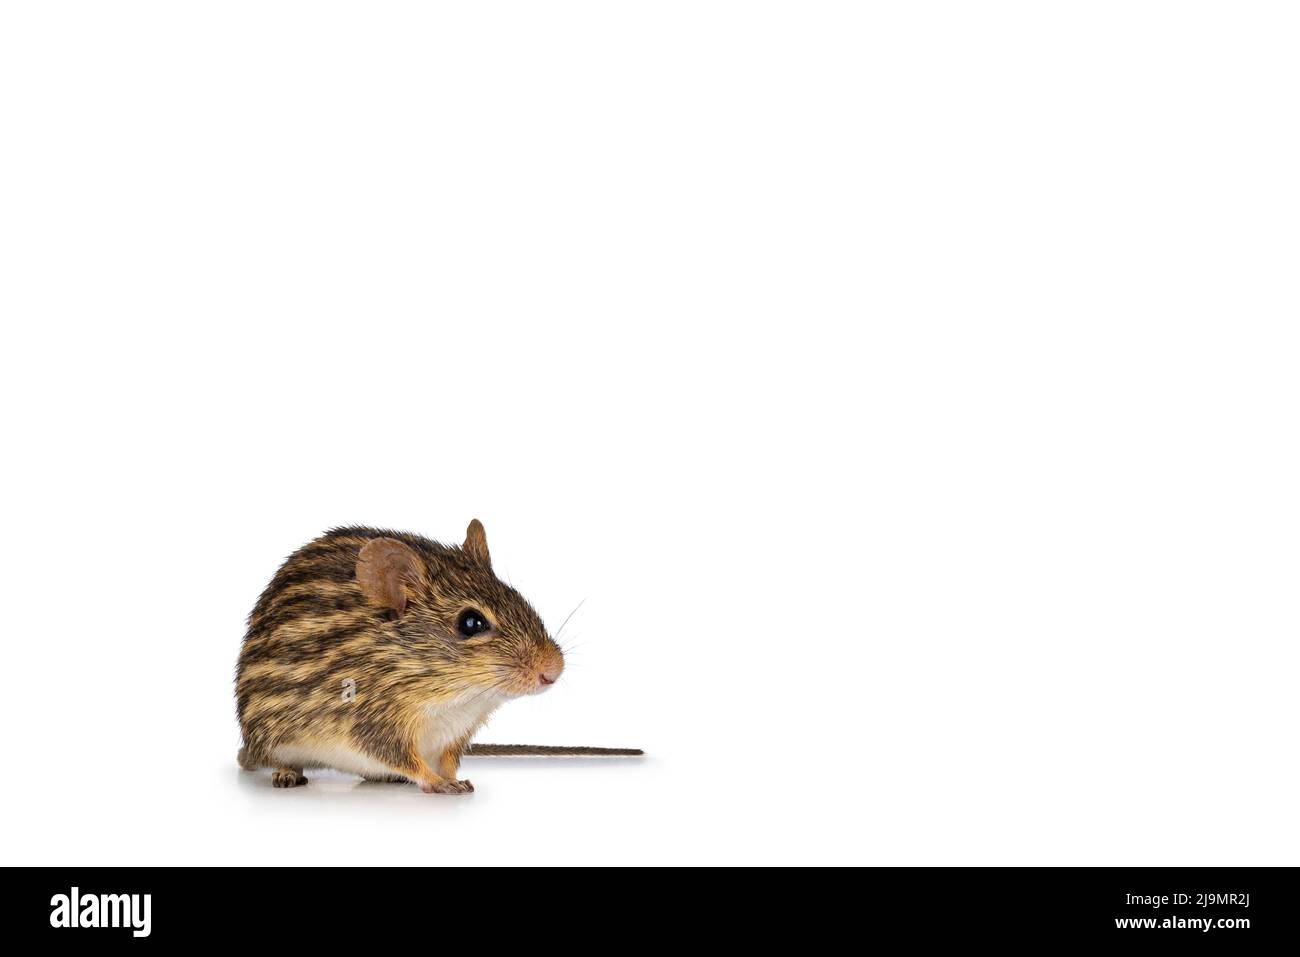 Striped grass mouse, sitting facing front. Looking towards camera eyes. Isolated on a white background. Stock Photo